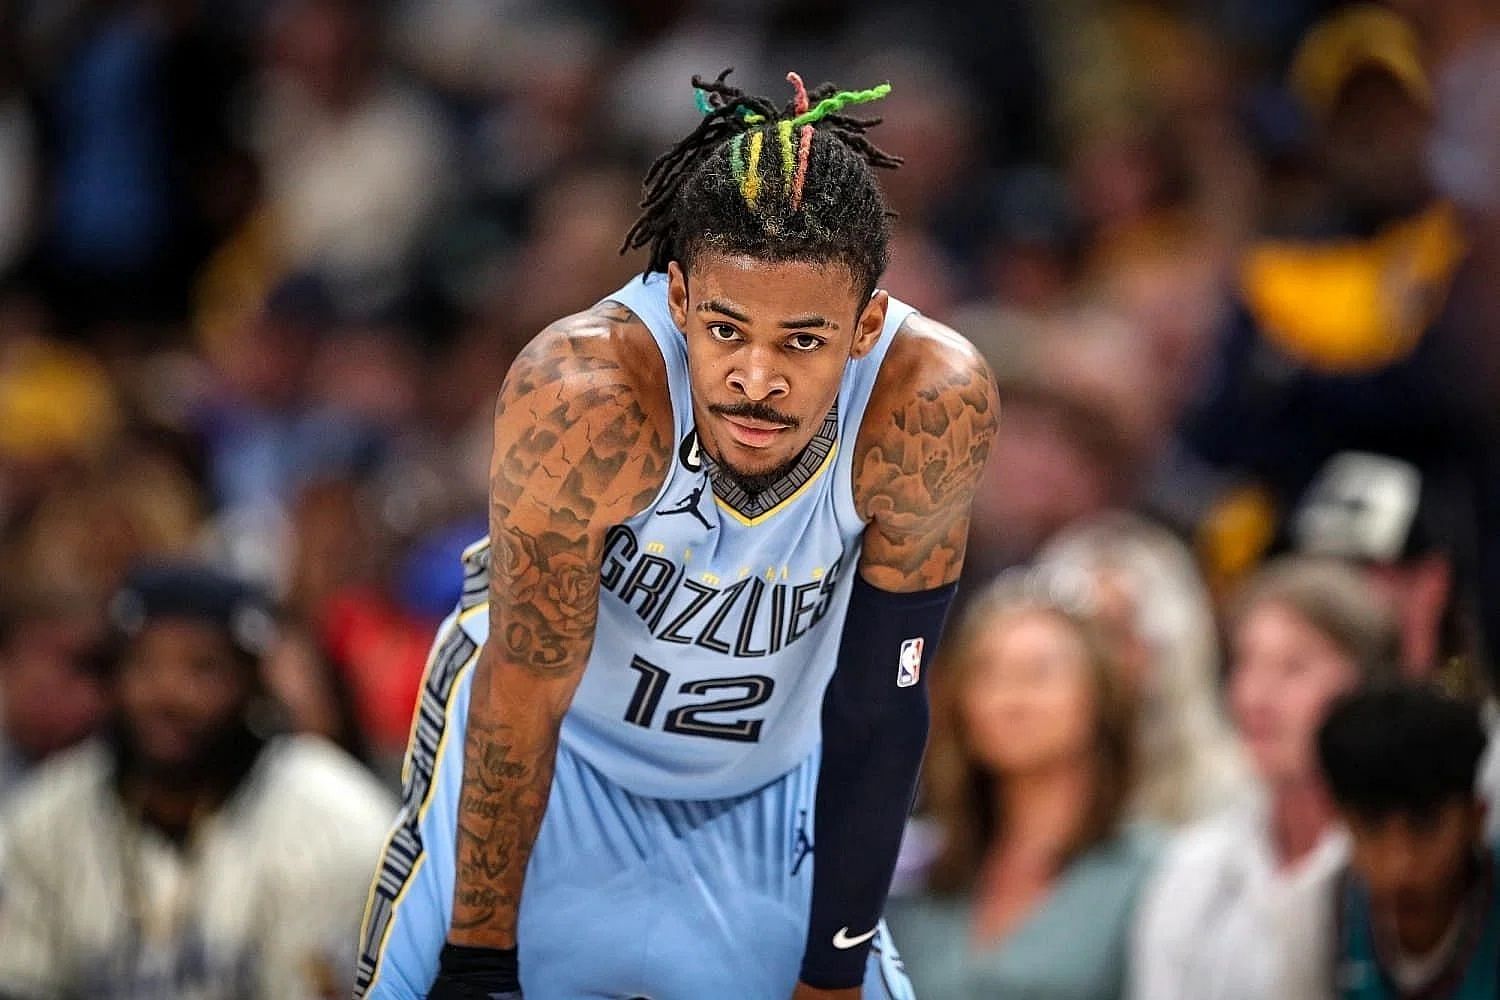 NBA fans gave Ja Morant of the Memphis Grizzlies props for the great job he has done since returning from susension.